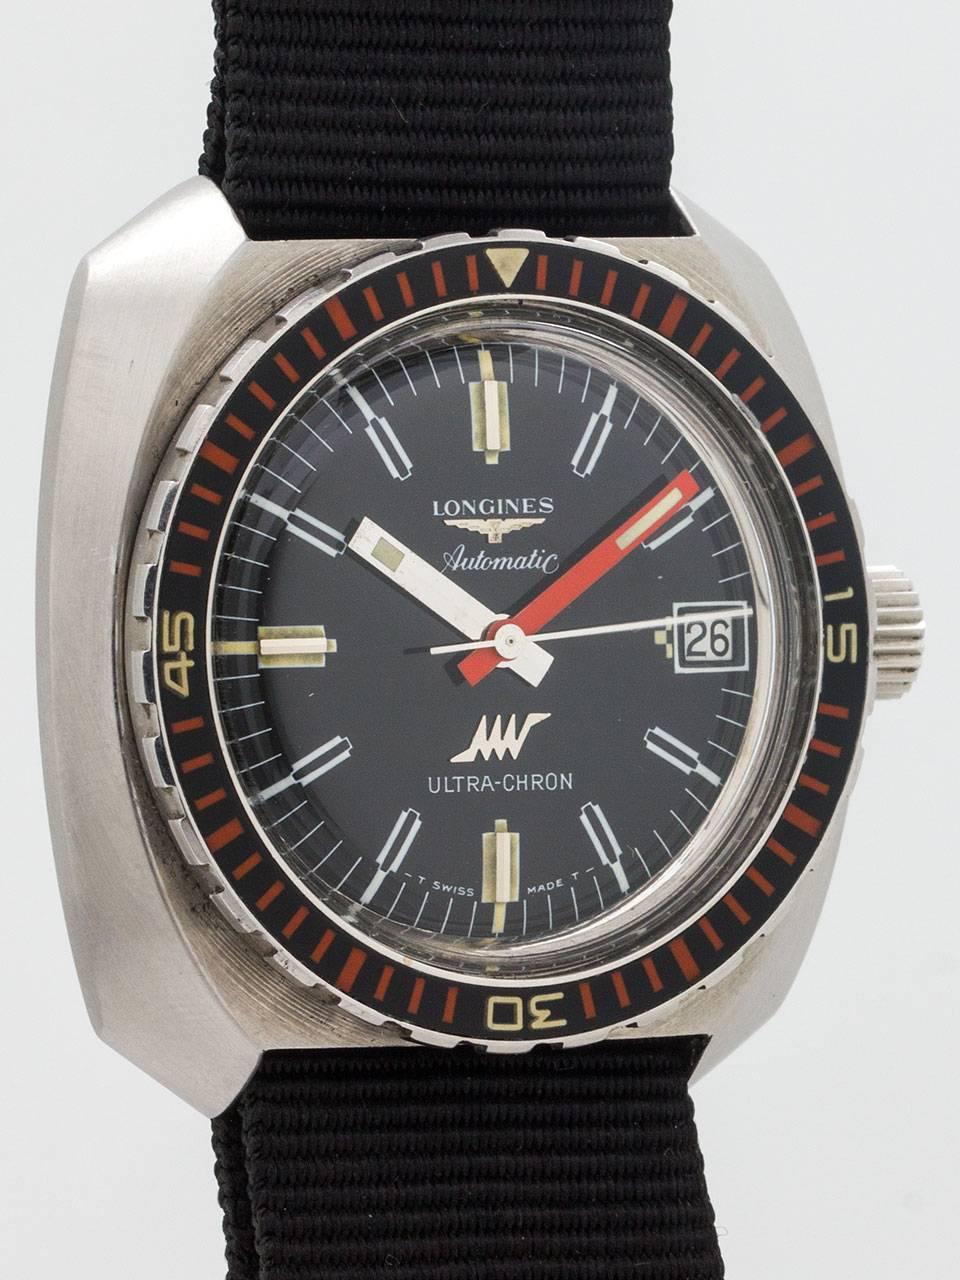 Great looking vintage Longines Ultra Chron Automatic Diver’s Wristwatch circa 1970s. Featuring a large 40m diameter case with screw down back, acrylic crystal, bi-directional black bakelite bezel with red minute indicators. Mint condition original